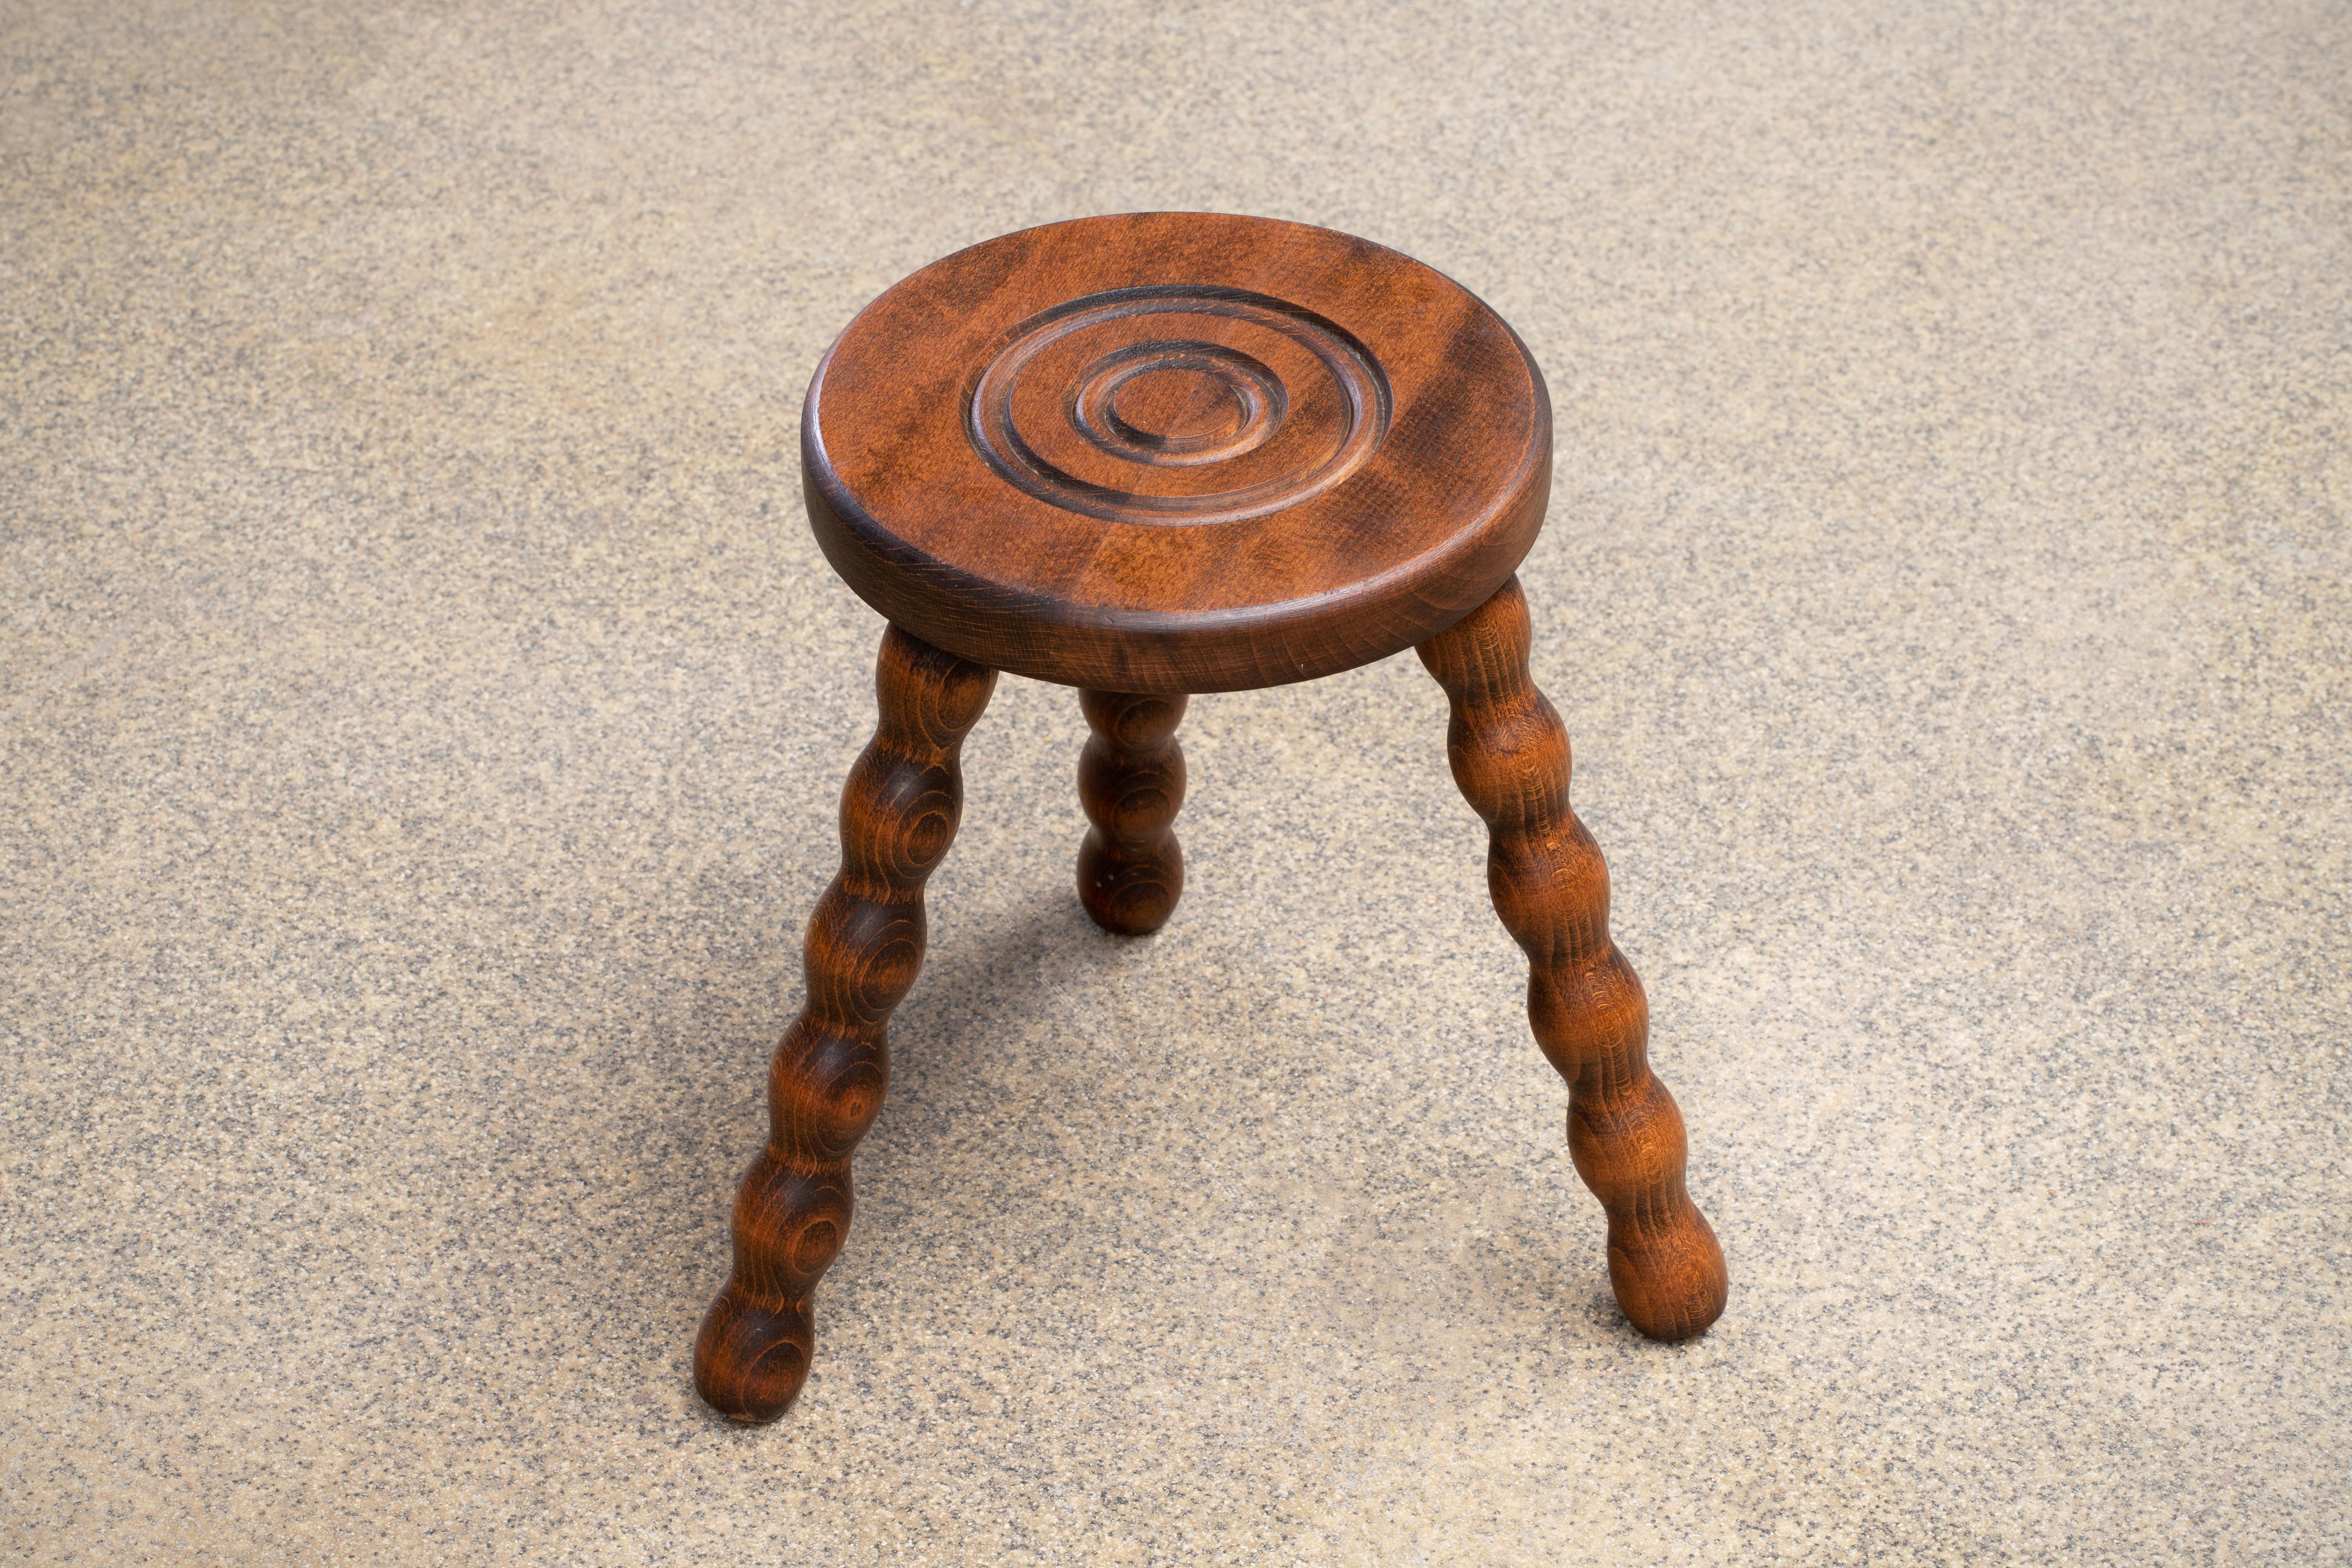 Vintage wood stool with beautiful wavy wood legs from France. Circular seat with unique carved ring detail on top. Original wood finish with great age markings and patina. Can be used as small stool or as side table next to chairs.
 